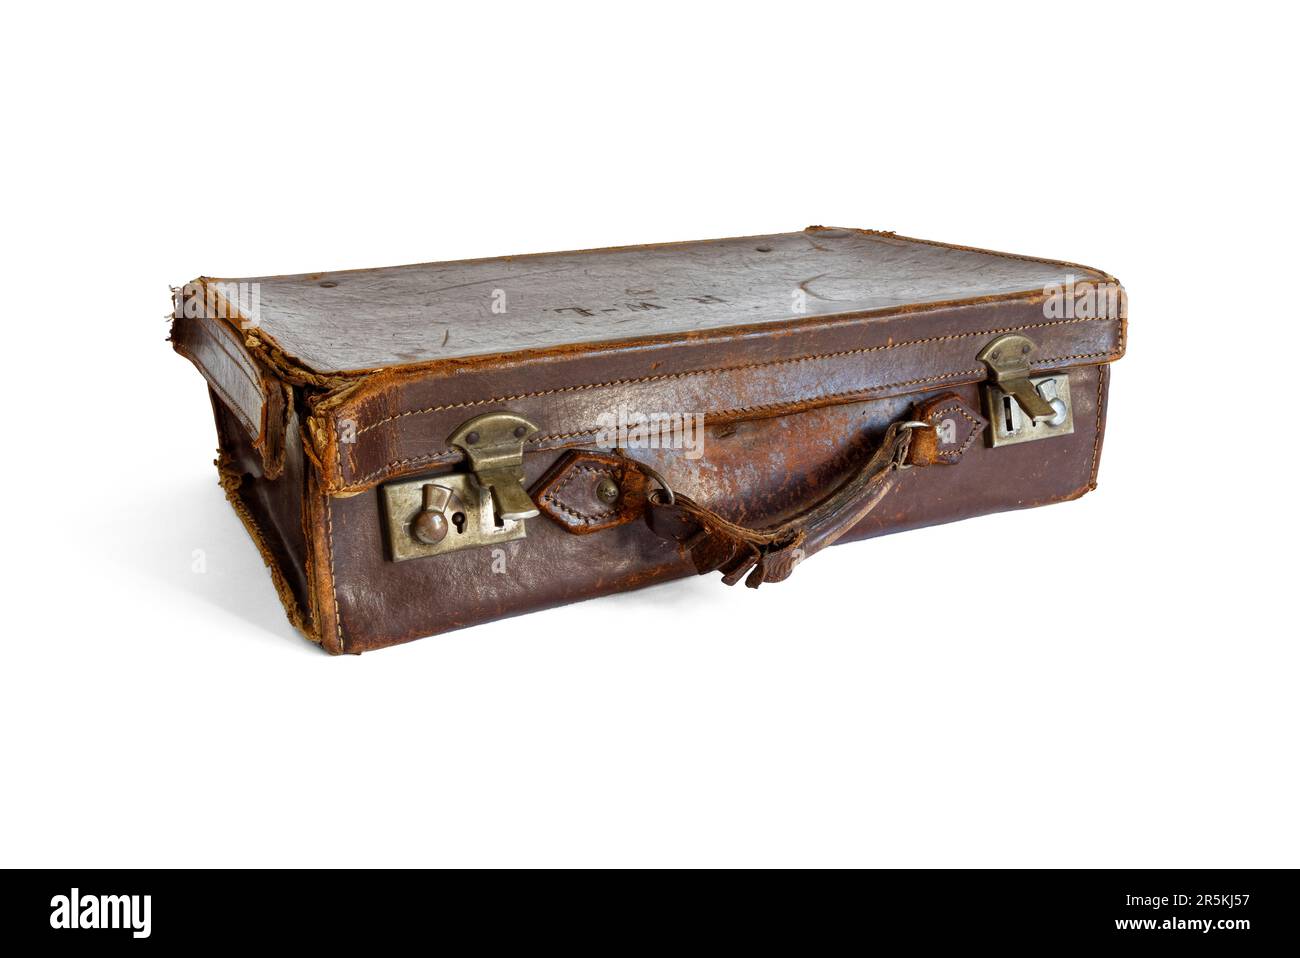 Old Fashioned Round Leather Suitcase Stock Photo - Download Image